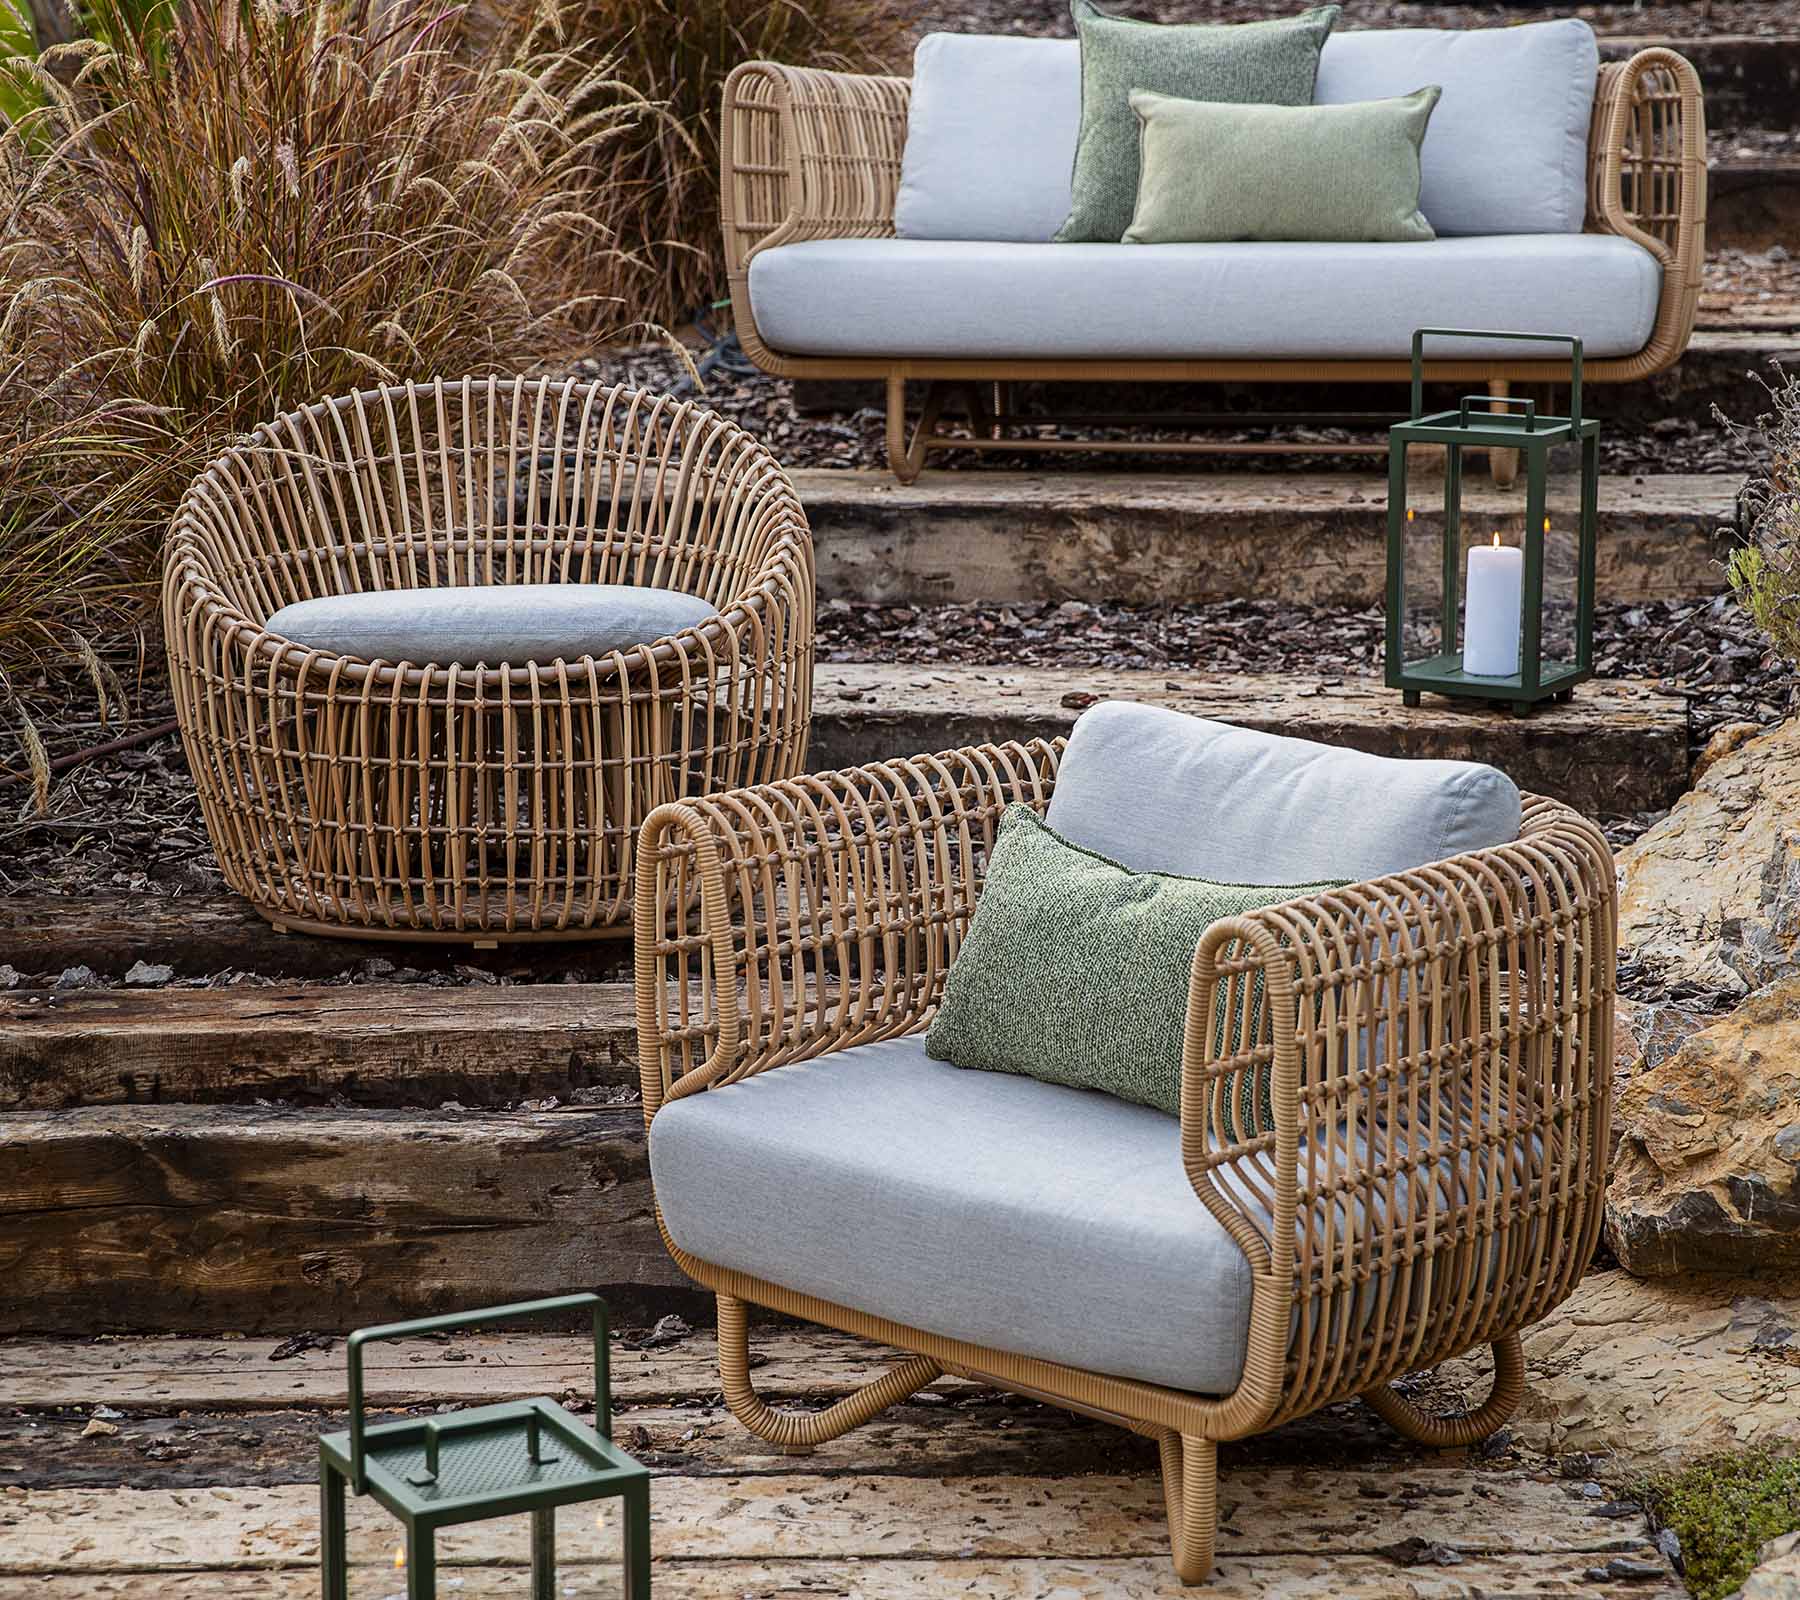 Cane-Line Denmark Outdoor Chairs Cane-Line Nest lounge chair OUTDOOR